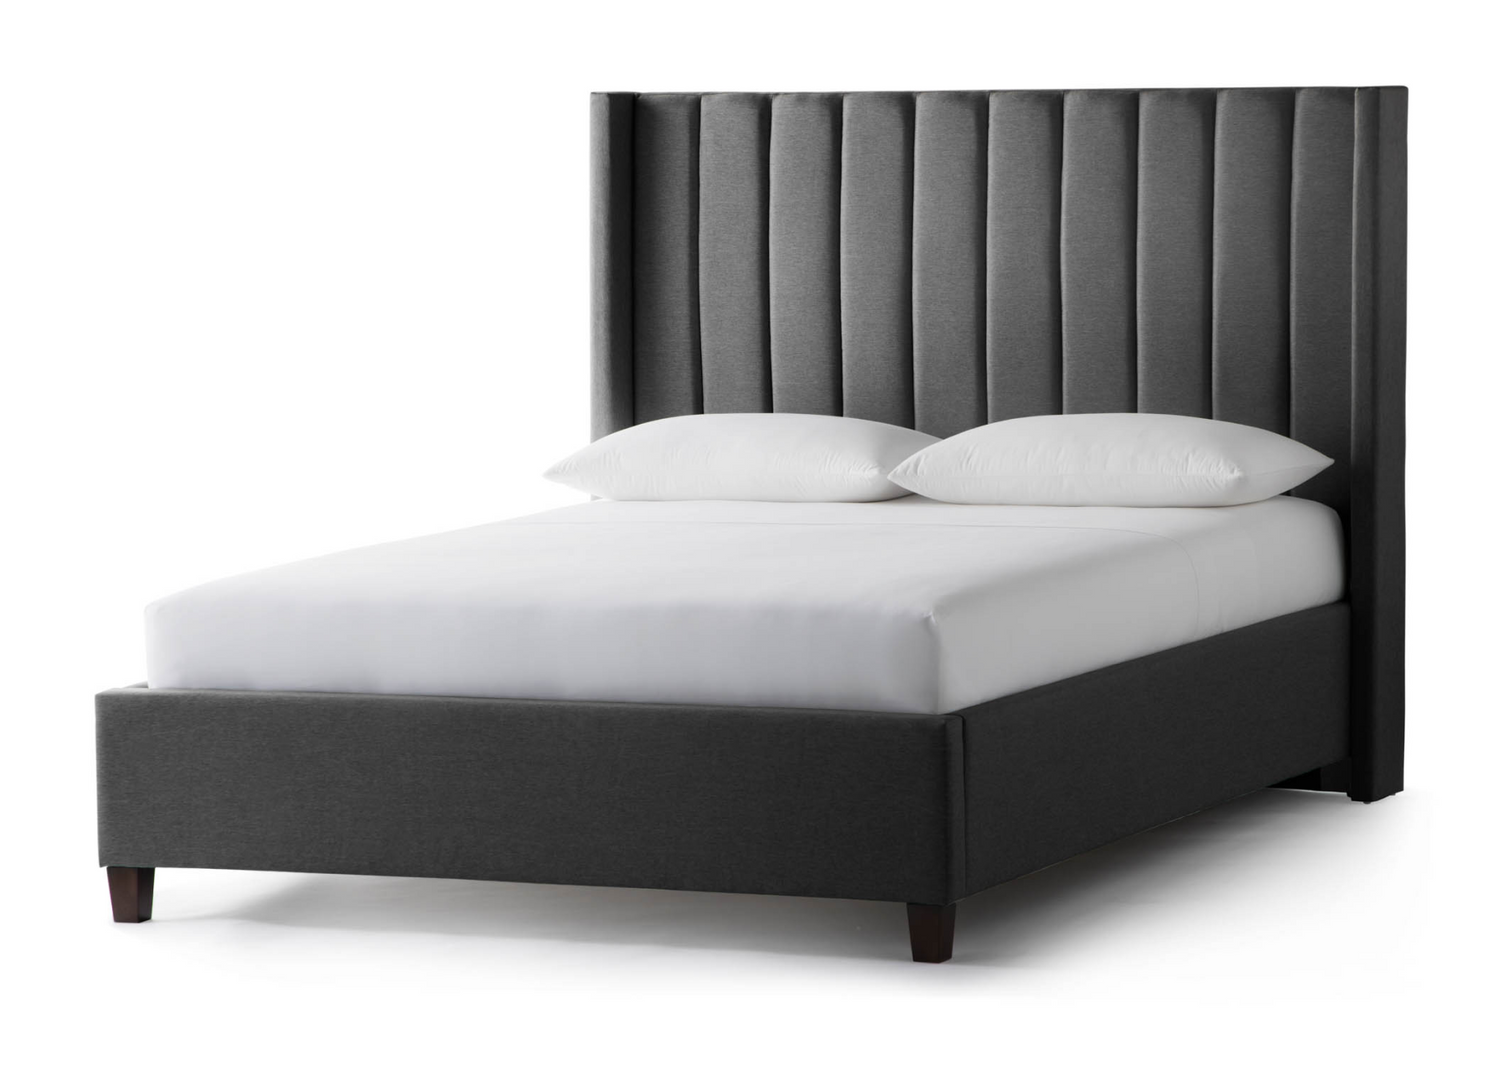 Front angle view of the Blackwell Bed in charcoal, highlighting the intricate vertical channel design - Mattress King